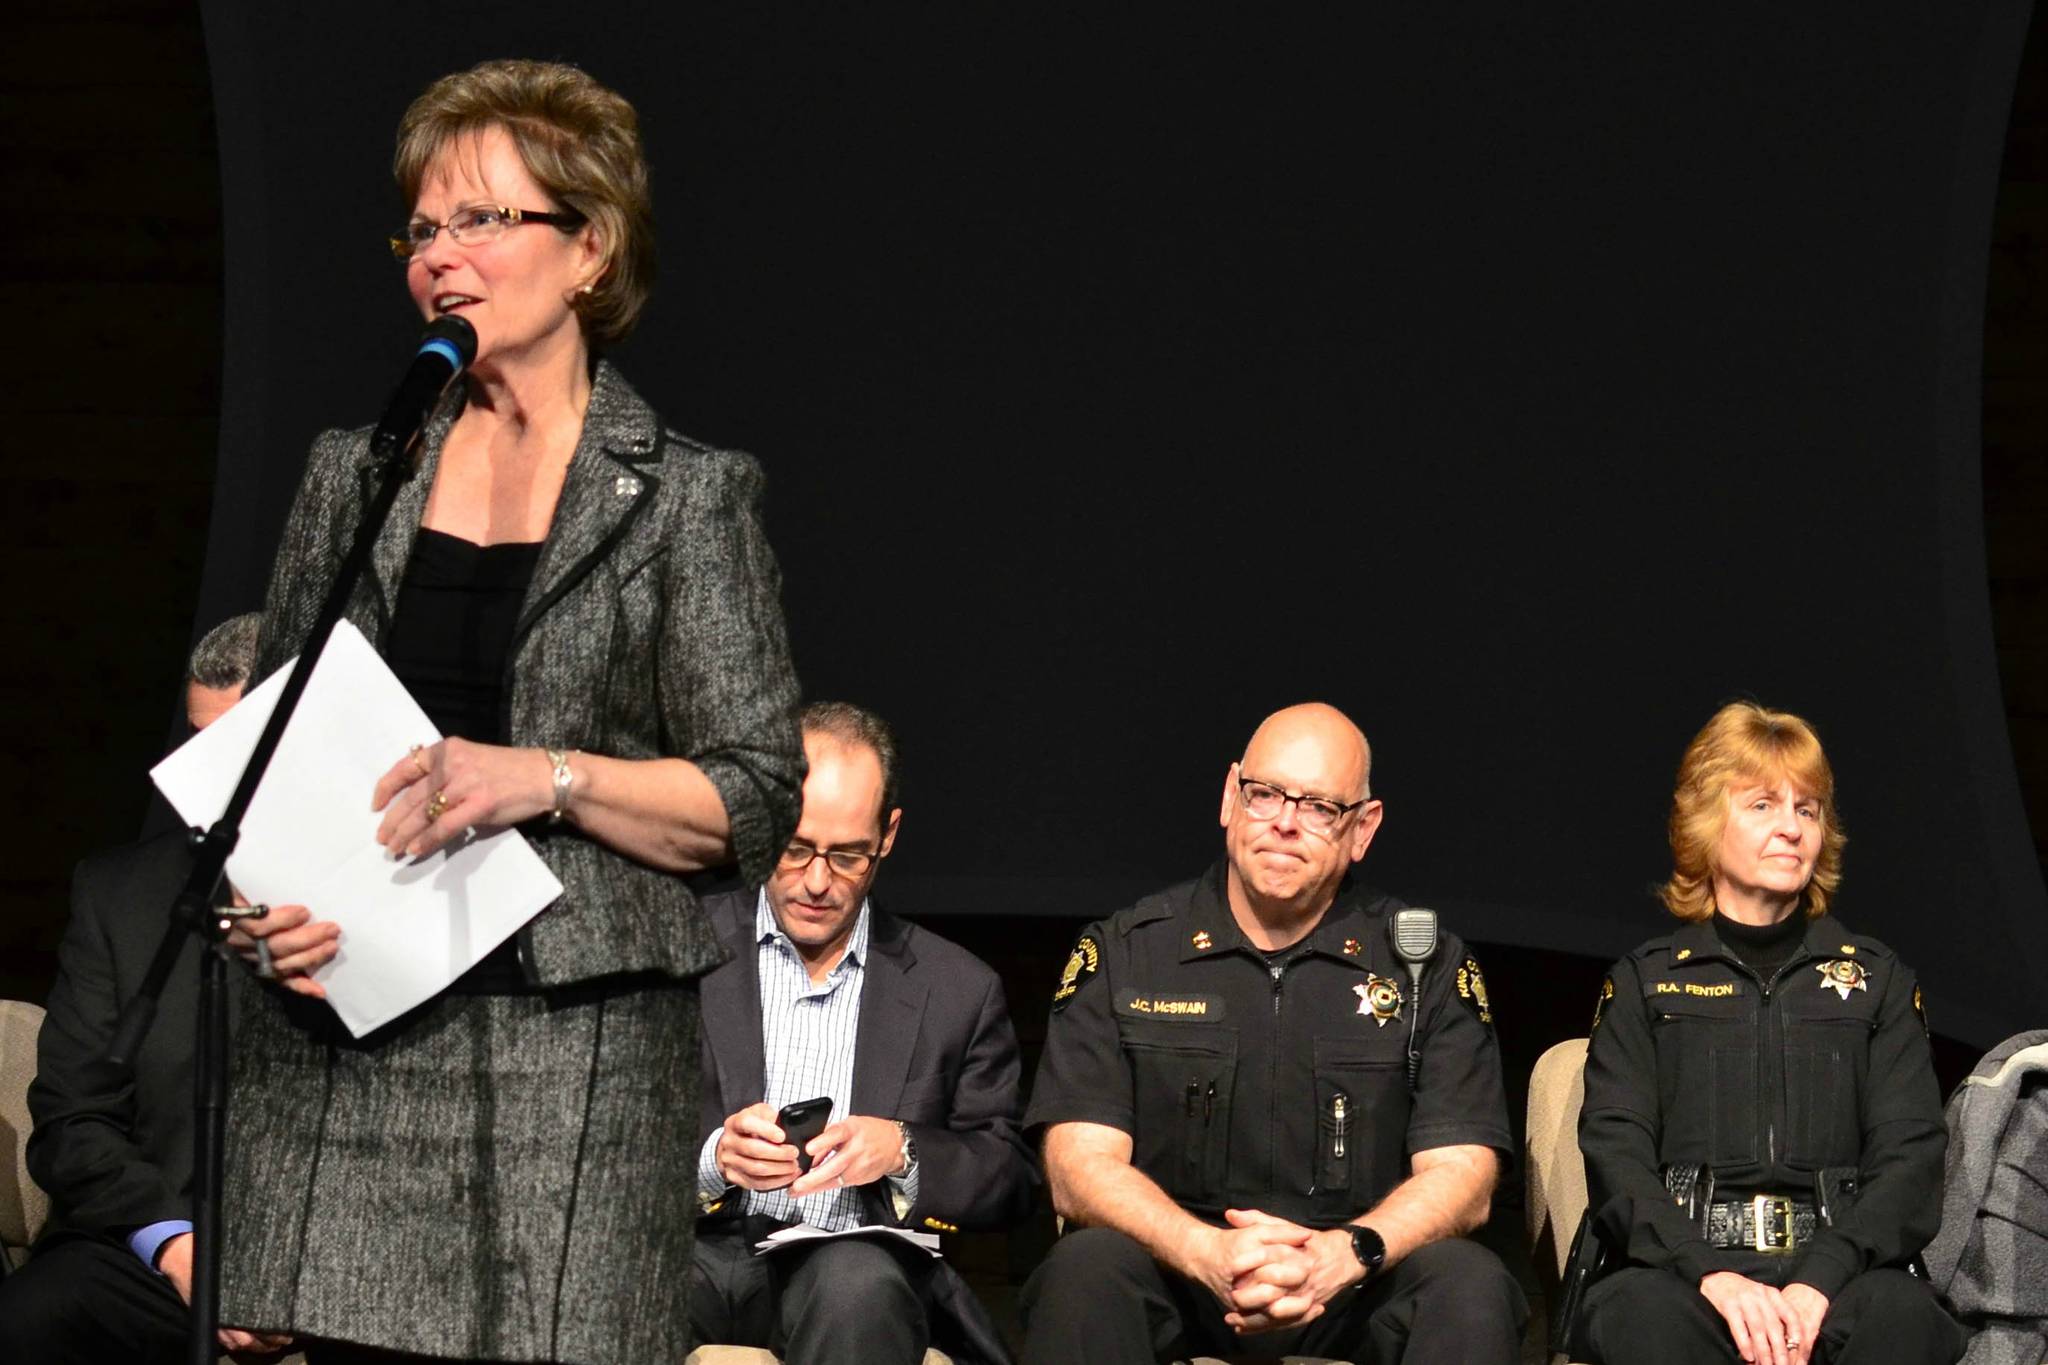 King County Council member Kathy Lambert leads the discussion at an informational opioid event on April 9. Photo by Josh Kelety